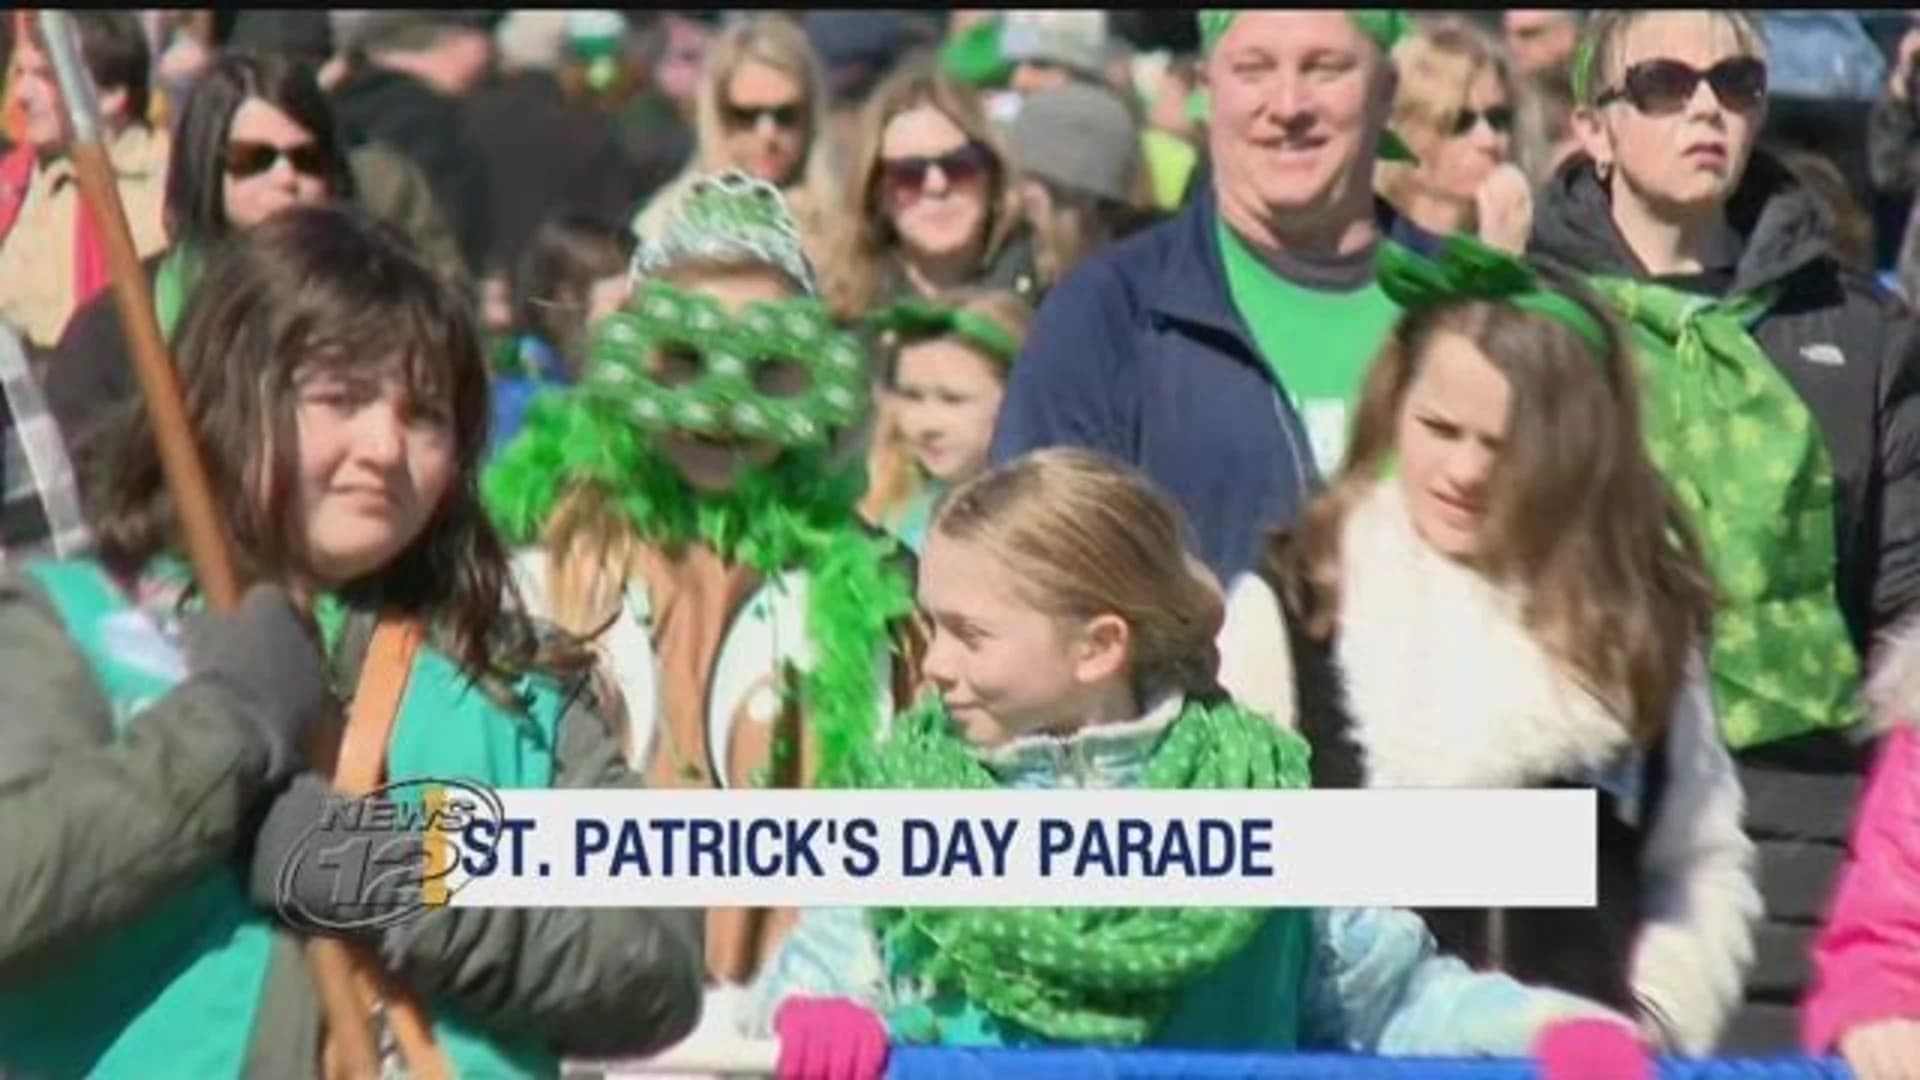 Pearl River holds 57th annual St. Patrick’s Day parade